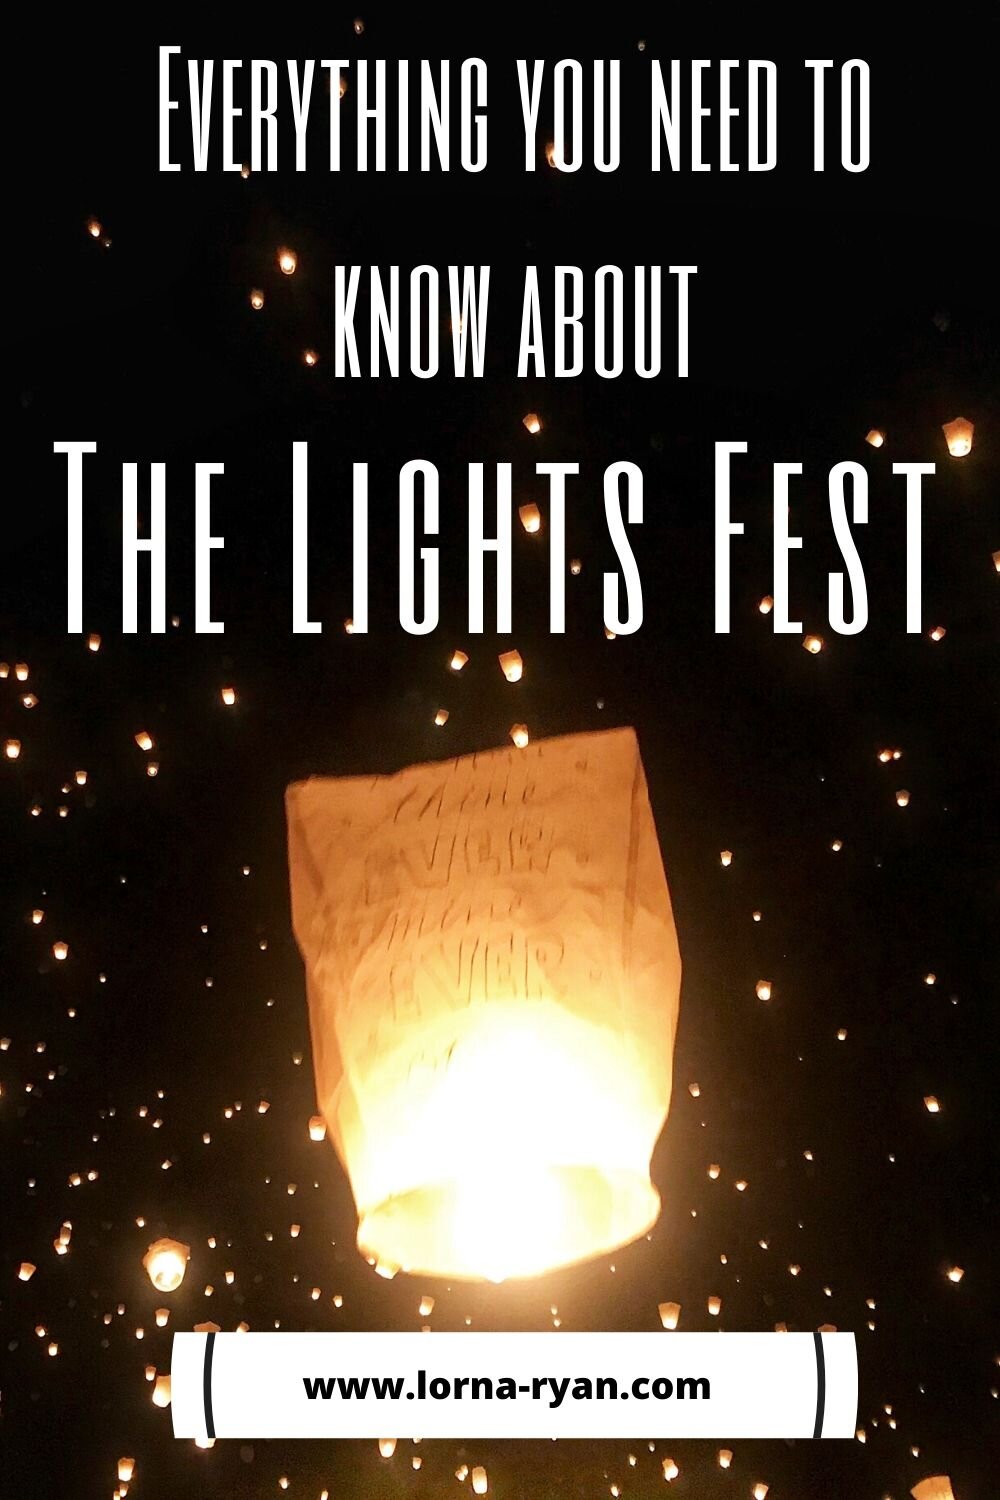 tickets to the Lights Fest, a lantern fest in the USA, Scam or the real deal, read more.